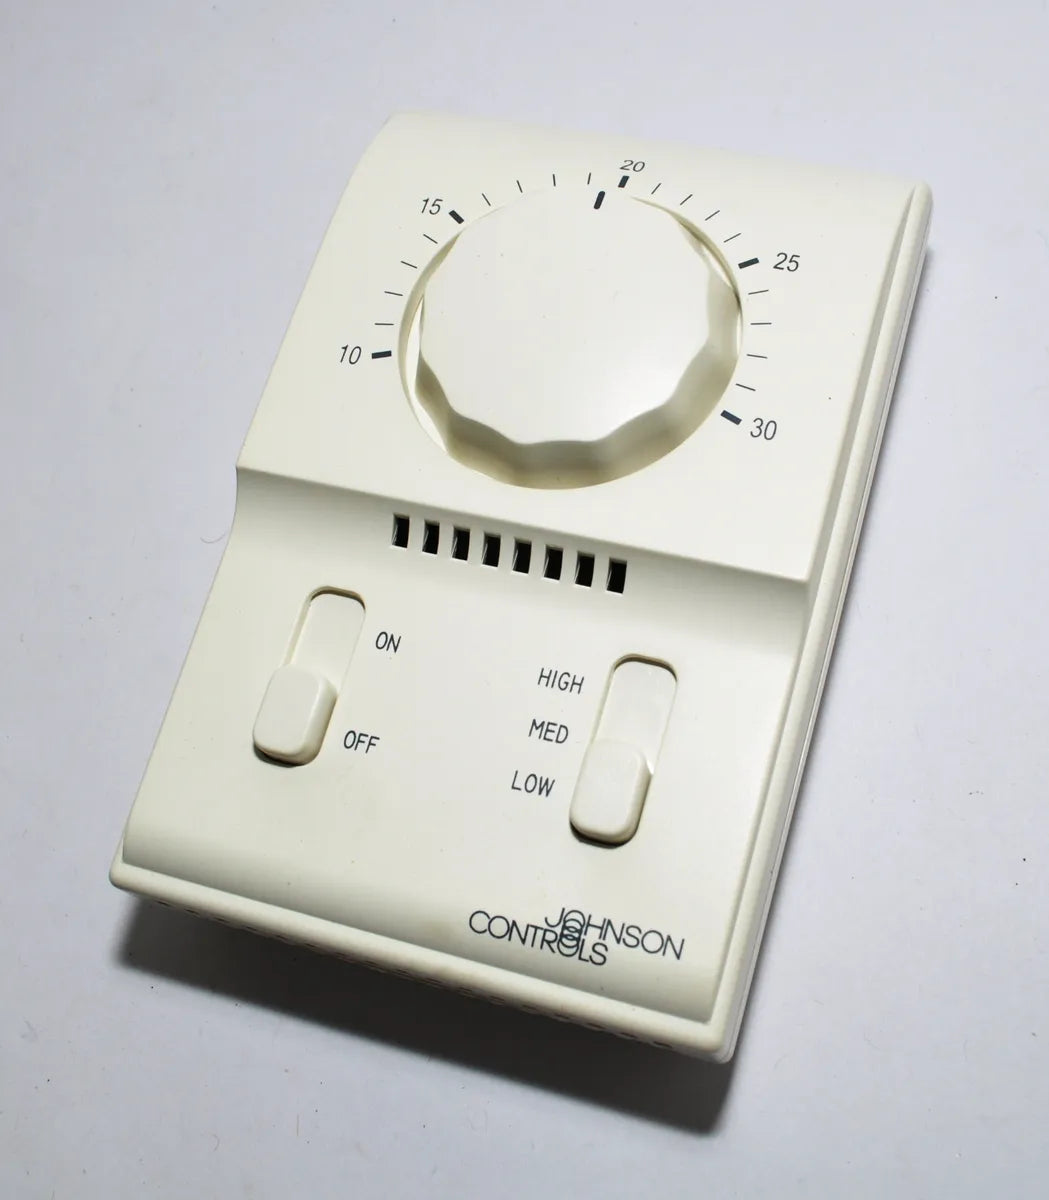 Johnson Controls 15/28°C Room Type Thermostat Cool/Heat ON/OFF H-M-L